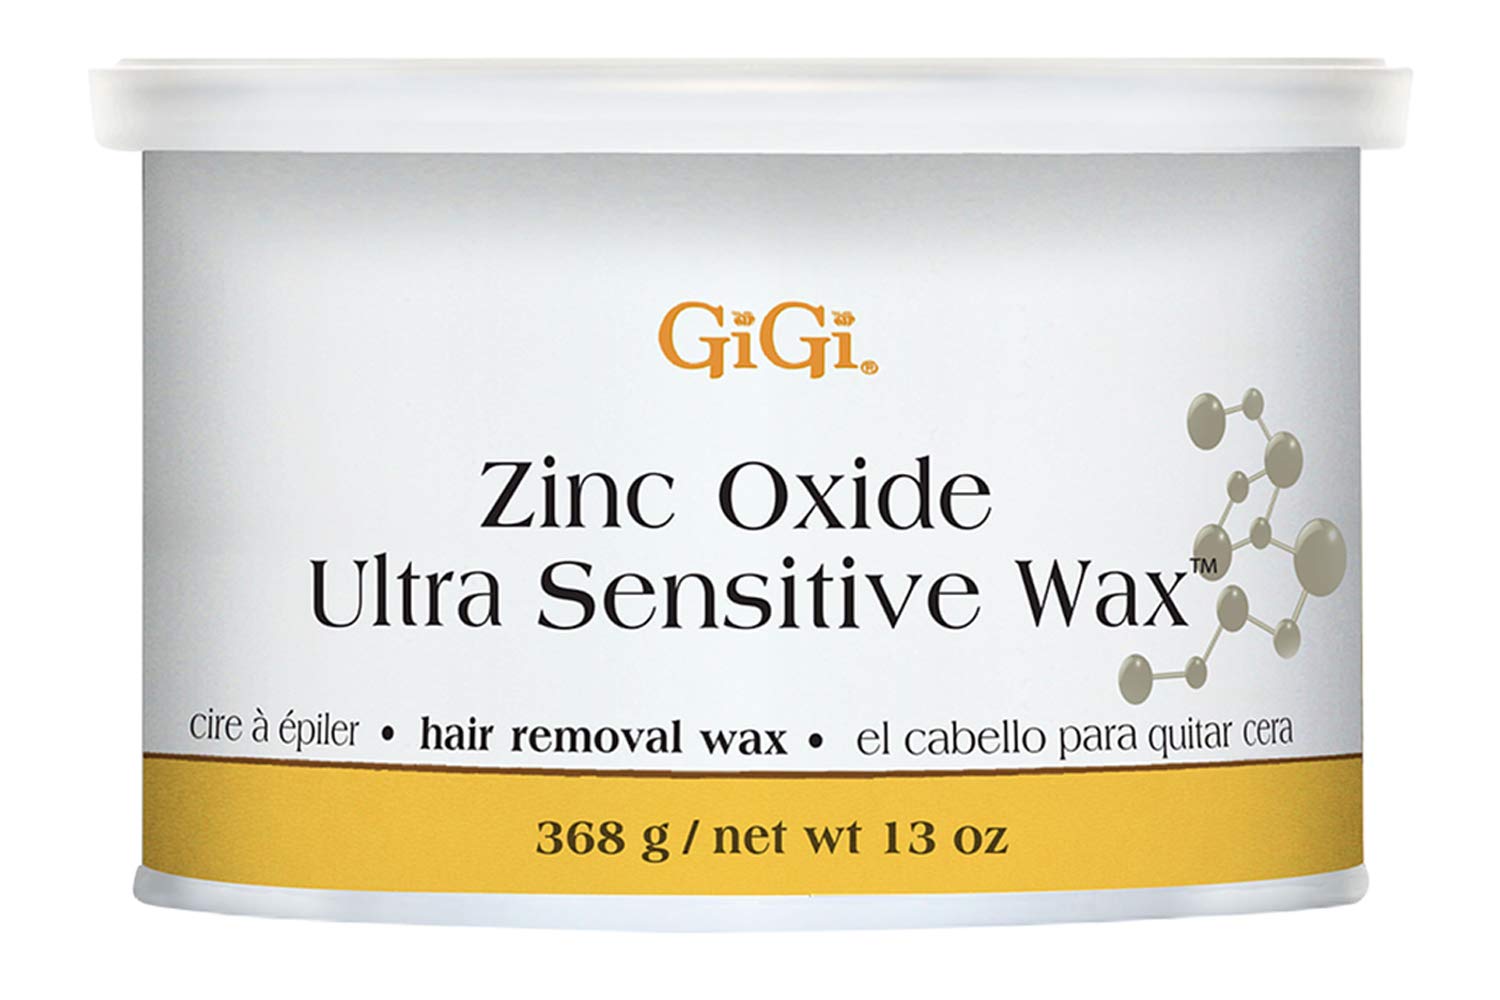 GiGi Zinc Oxide Ultra Sensitive Hair Removal Wax, Gentle and on Extra-Delicate Skin, 13 oz., 1-pc